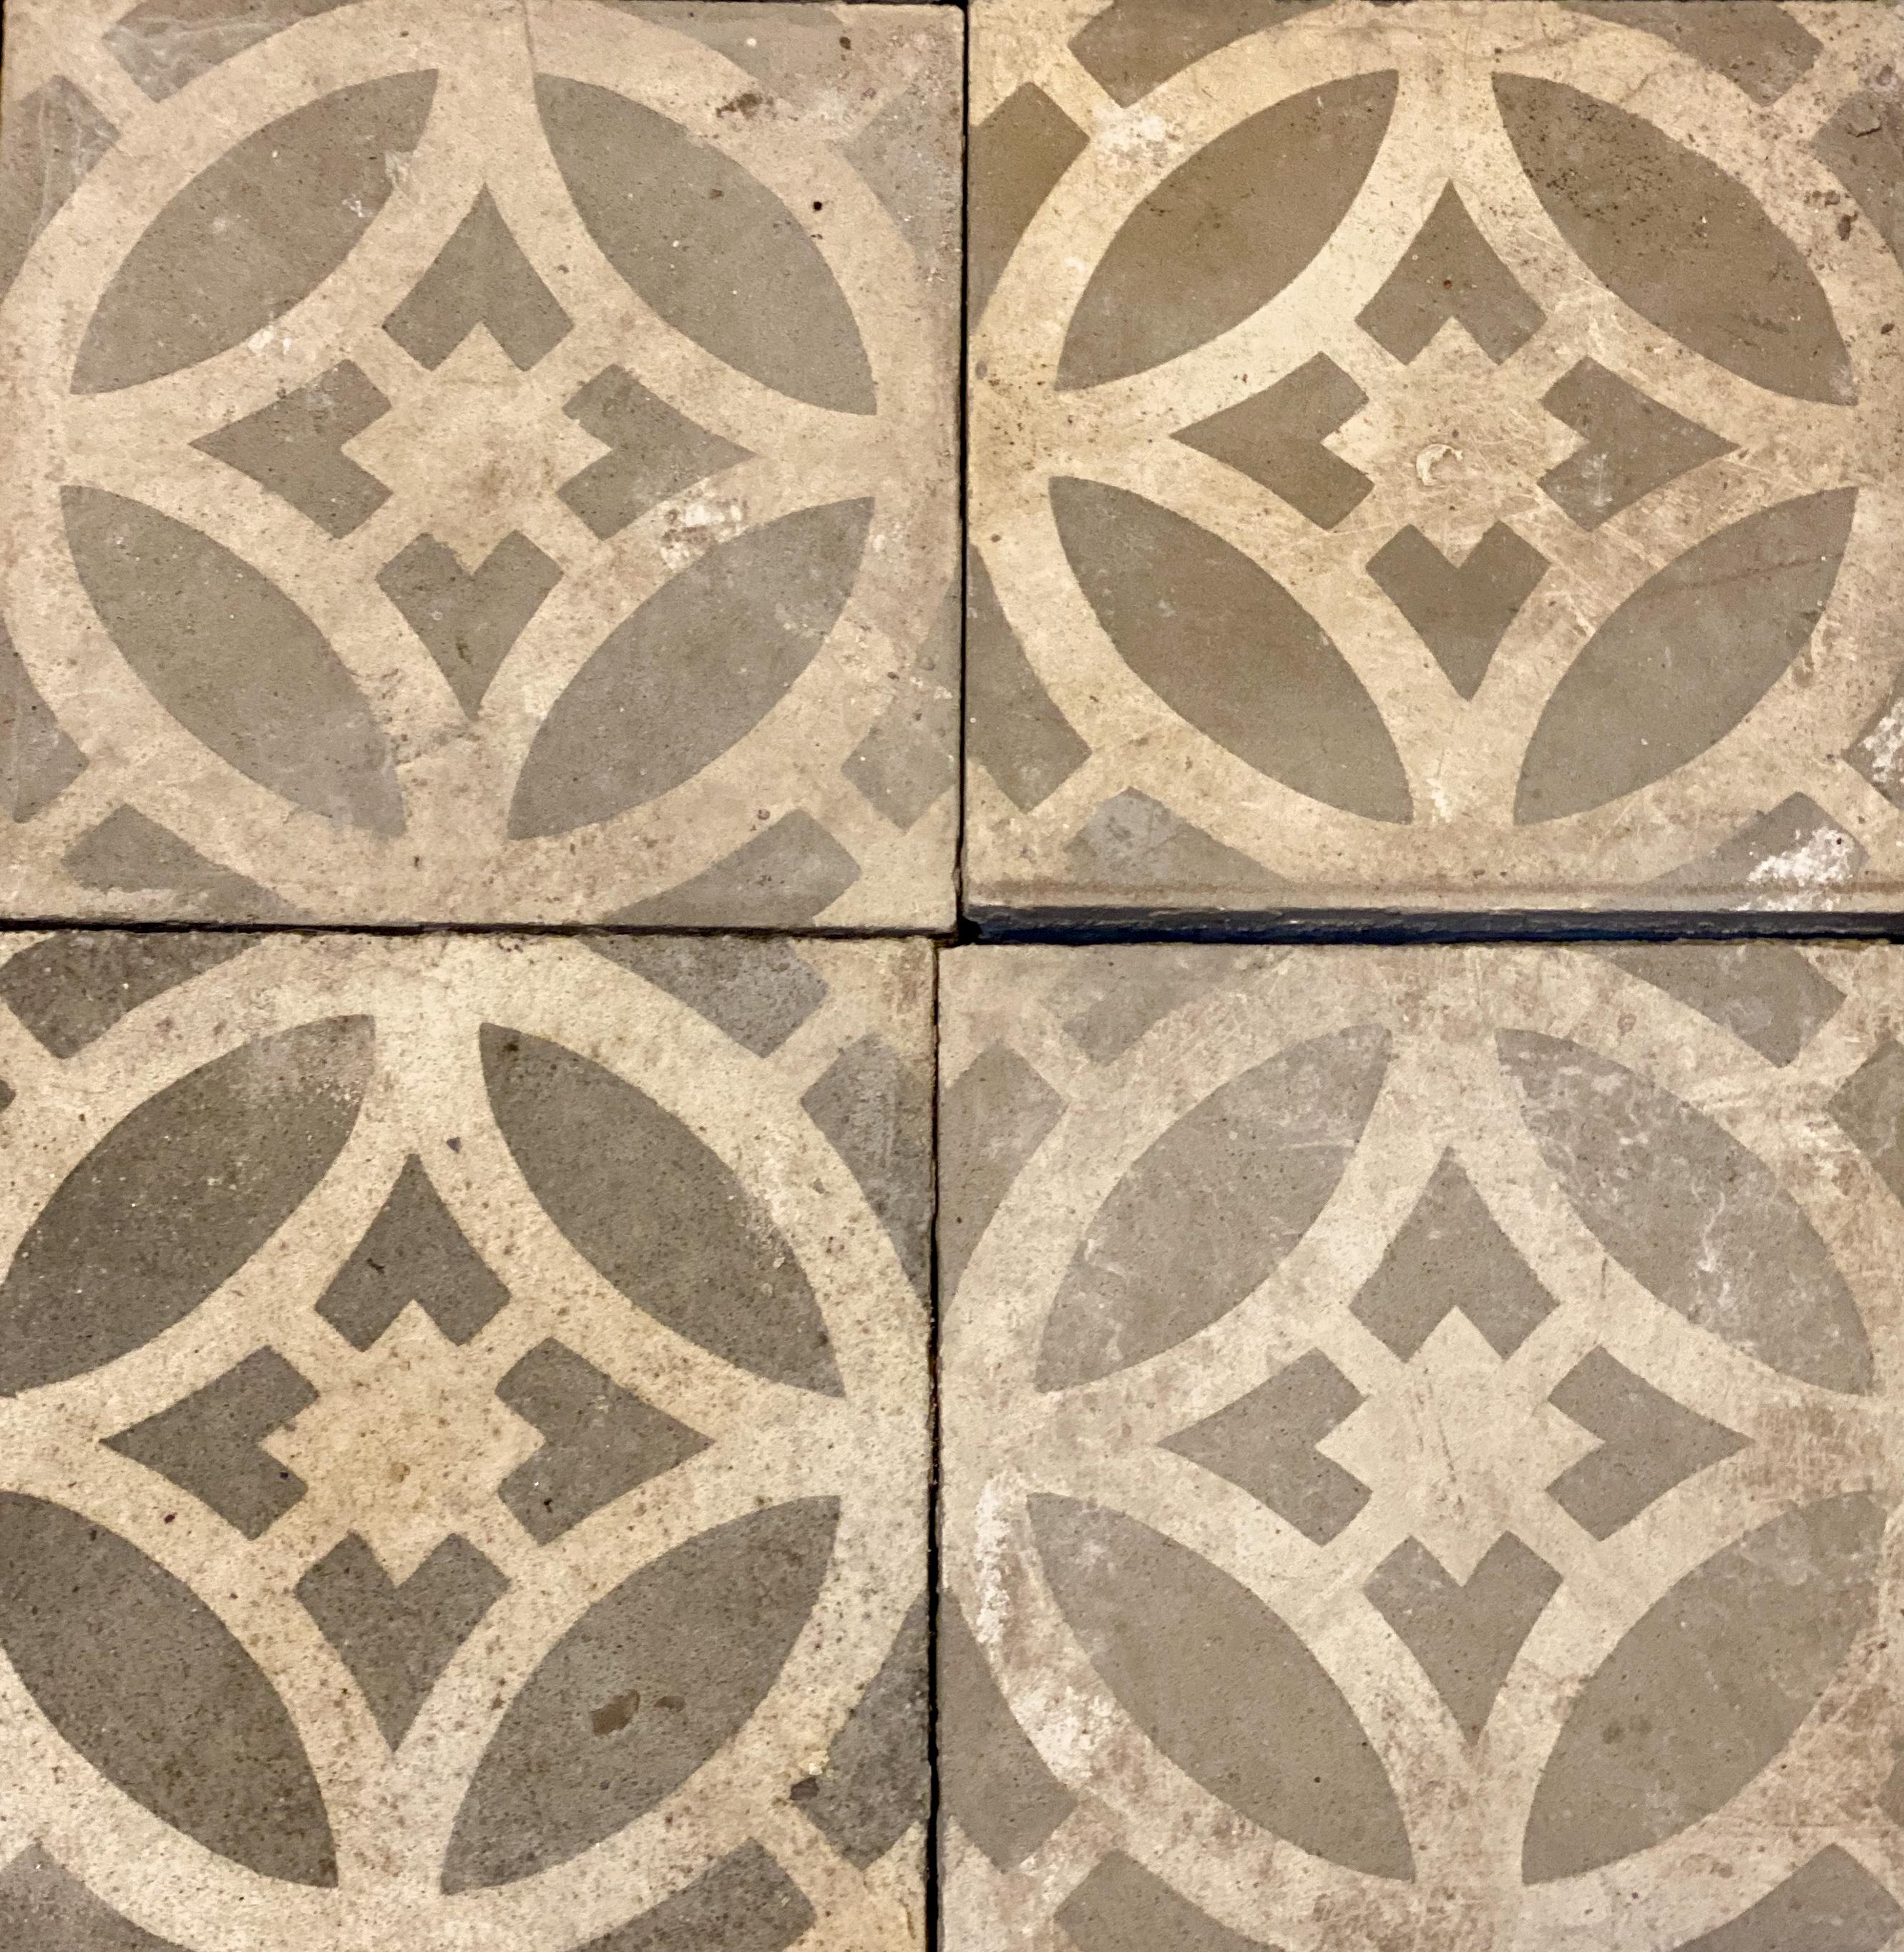 This lot of 420 square feet of tiles originates from Spain, circa 1900.
Each tile is 8